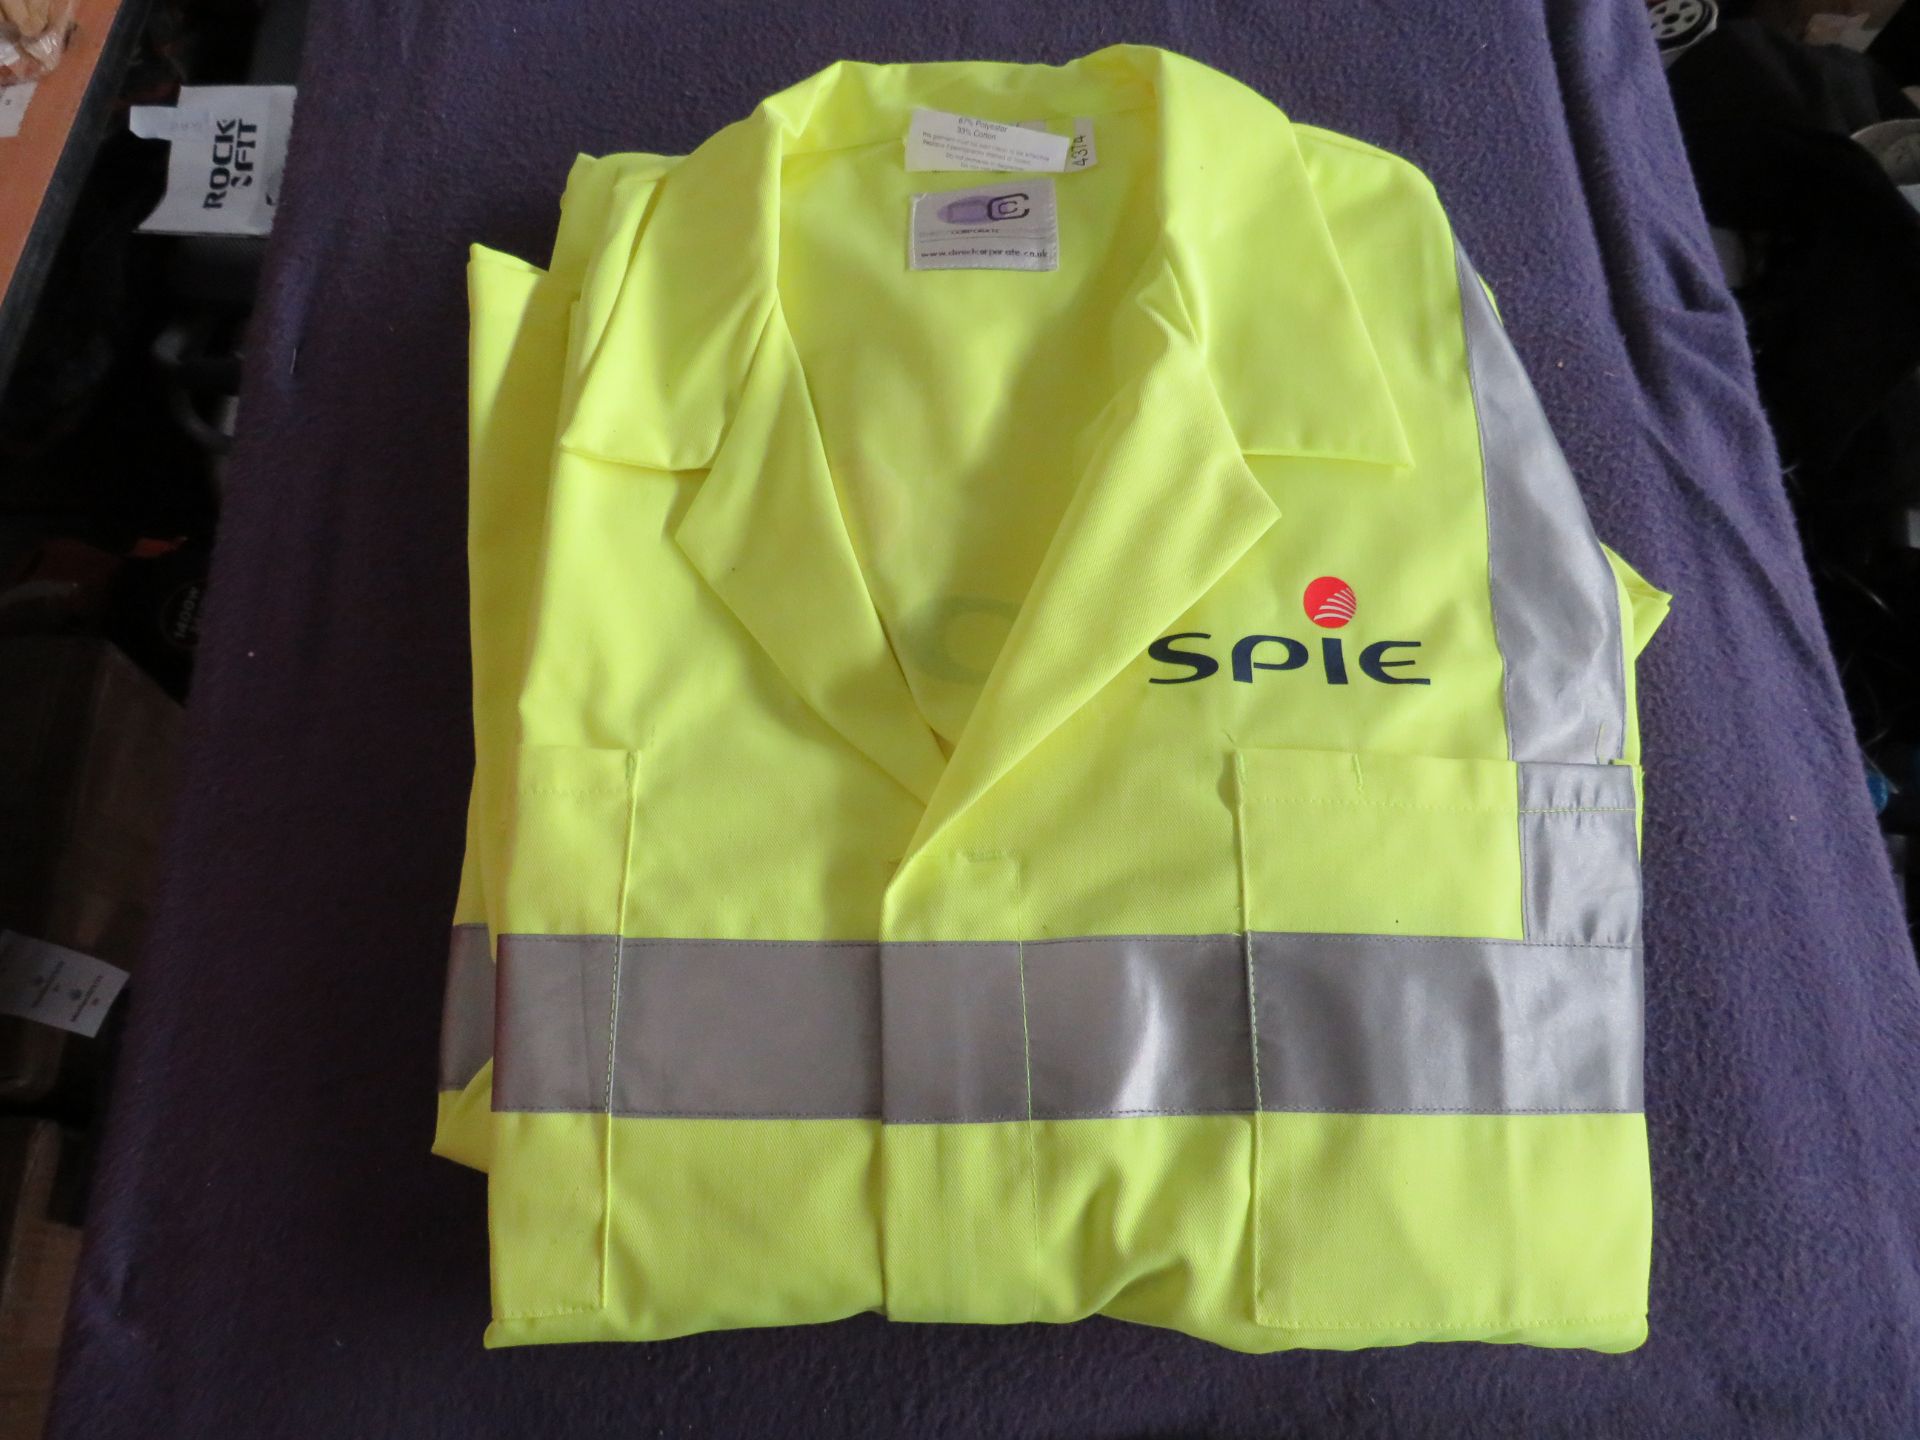 SPIE Branded Saturn Yellow Polycotton Boilersuit - Size 3XL - New & Packaged.